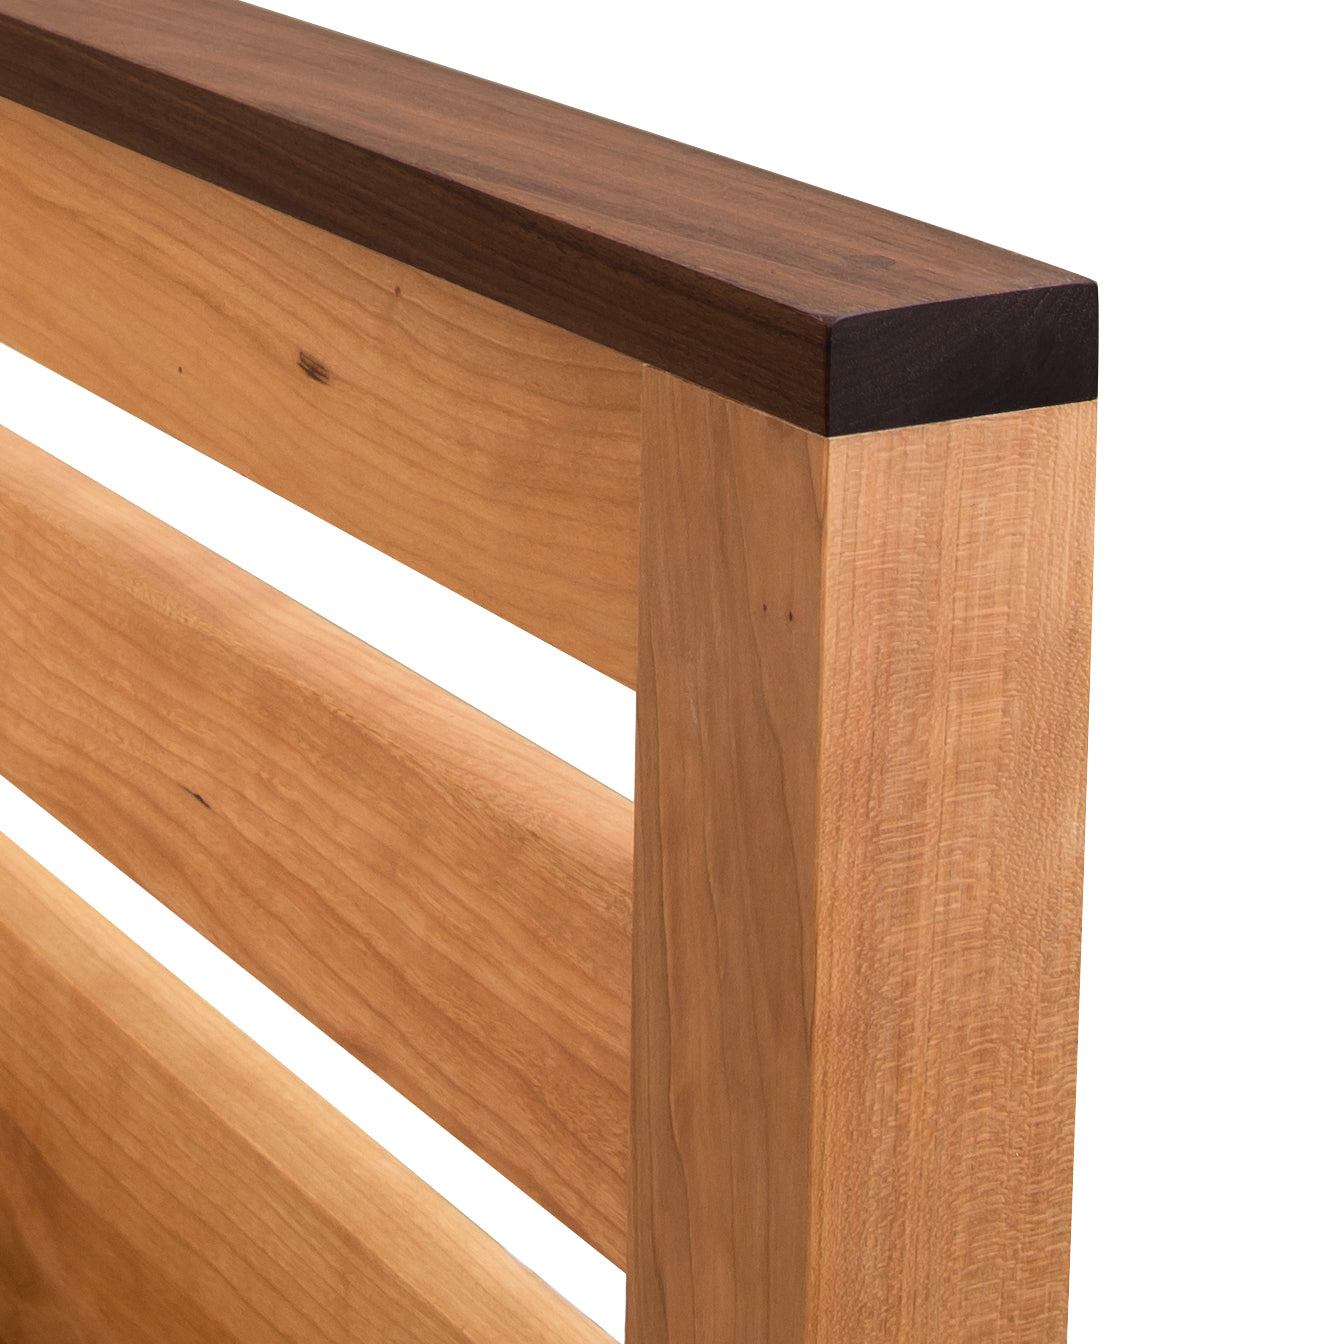 A close-up of a solid Cherry, eco-friendly Vermont Furniture Designs Skyline Panel Bed frame corner showcasing the joinery and wood grain details.